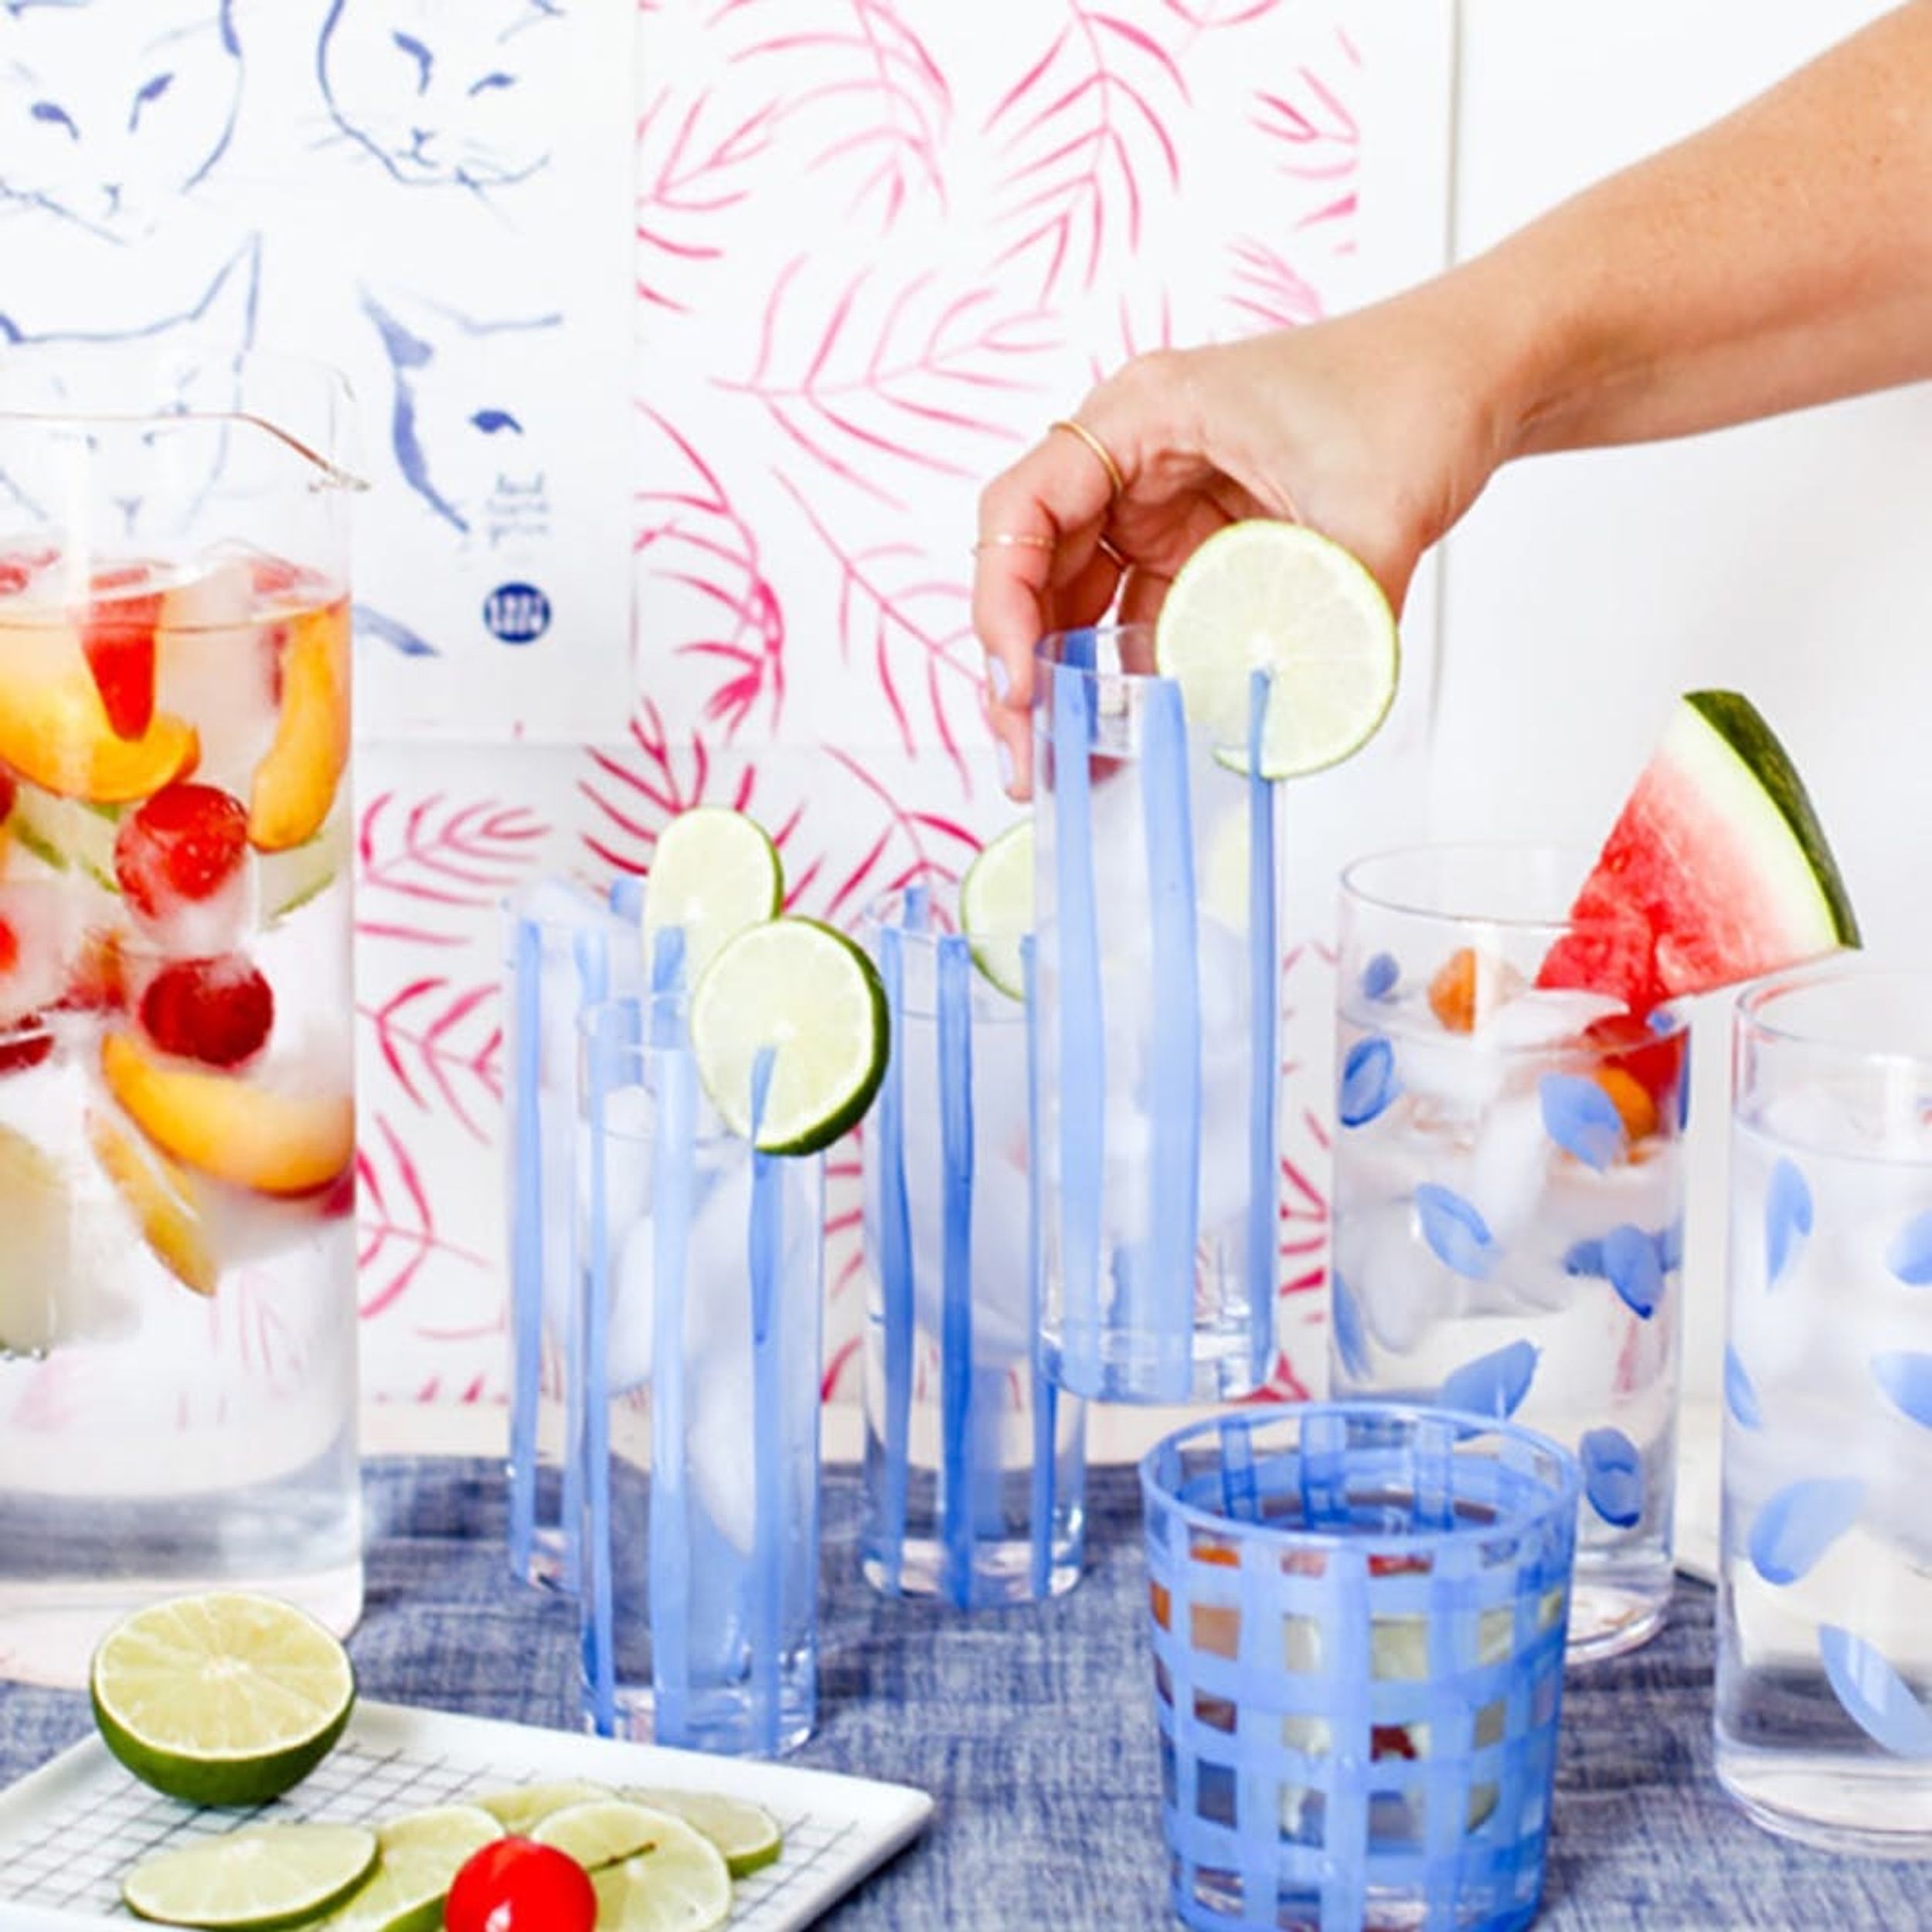 12 Easy Weekend Projects to Stay Cool This Summer